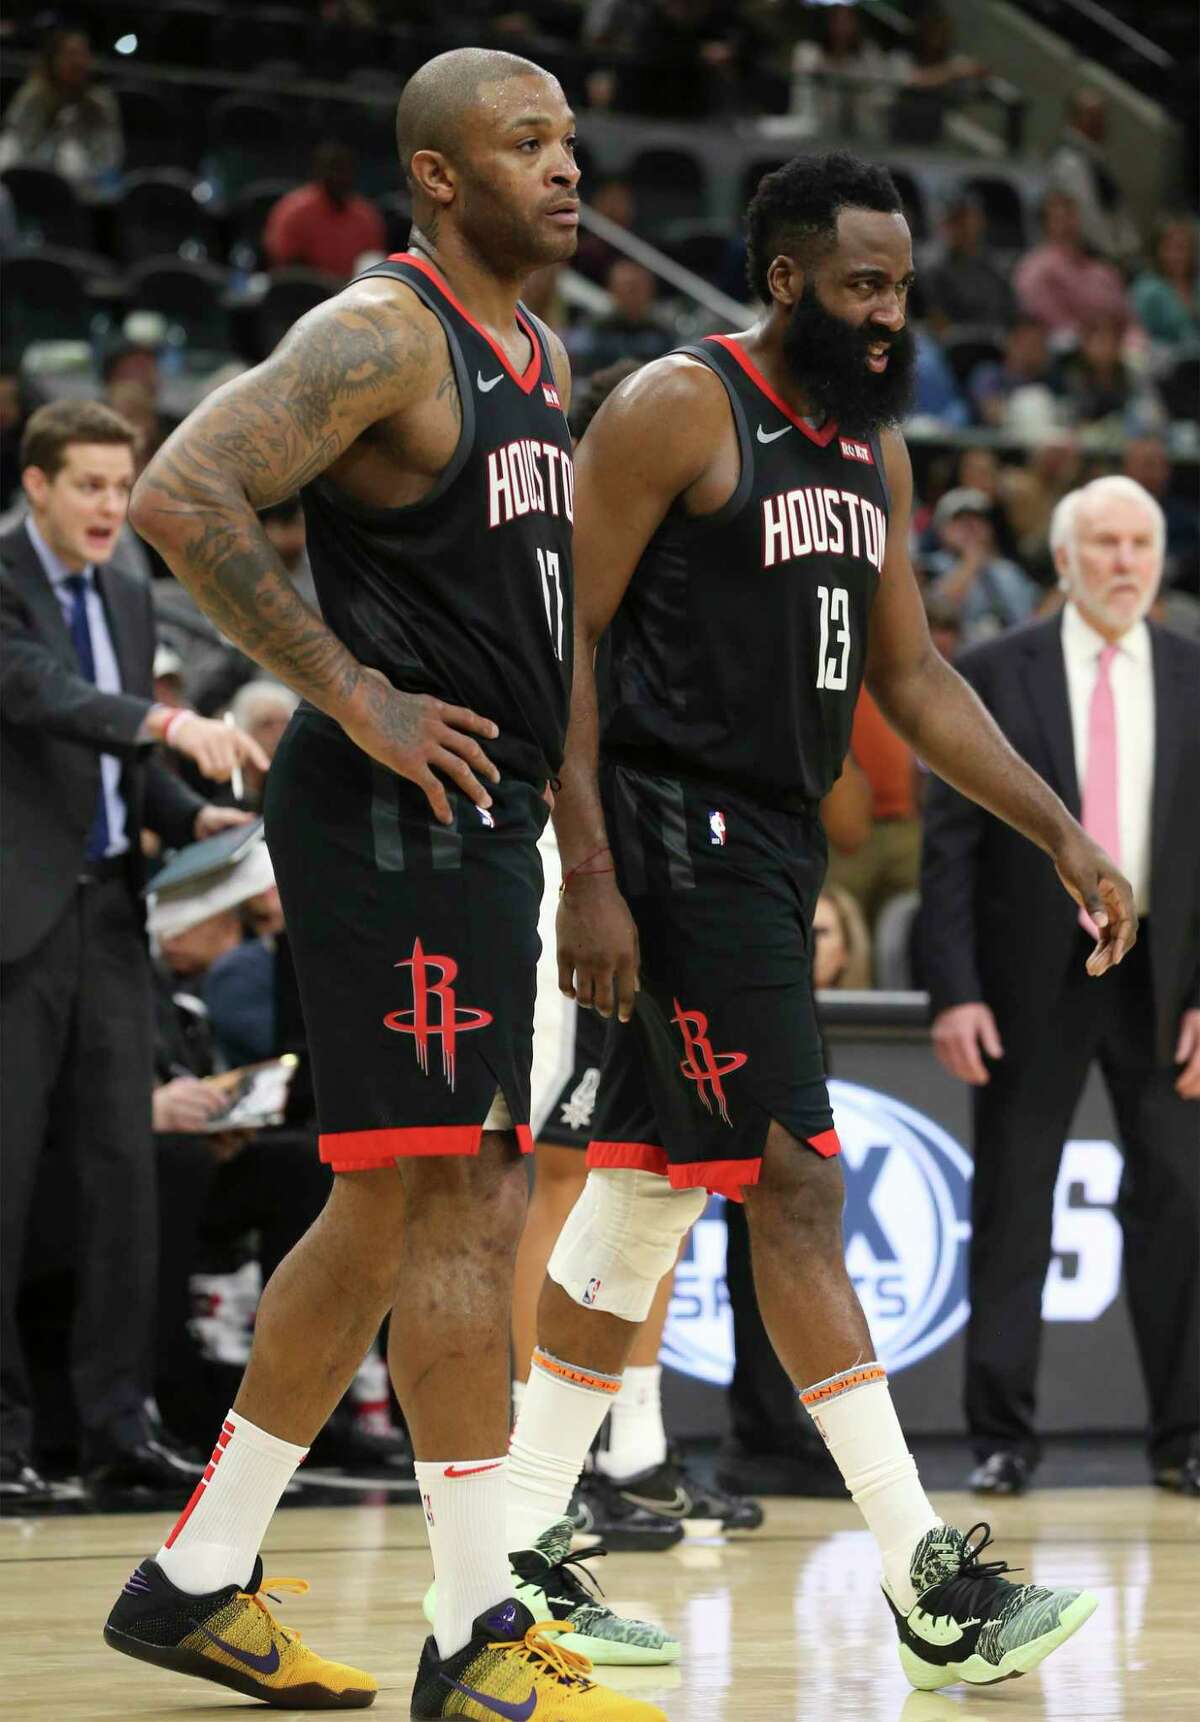 Houston Rockets' James Harden (13) reacts after a play against the Spurs during their game at the AT&T Center on Tuesday, Dec. 3, 2019. Spurs rally from 22 points to defeat the Rockets, 135-133, in double overtime.